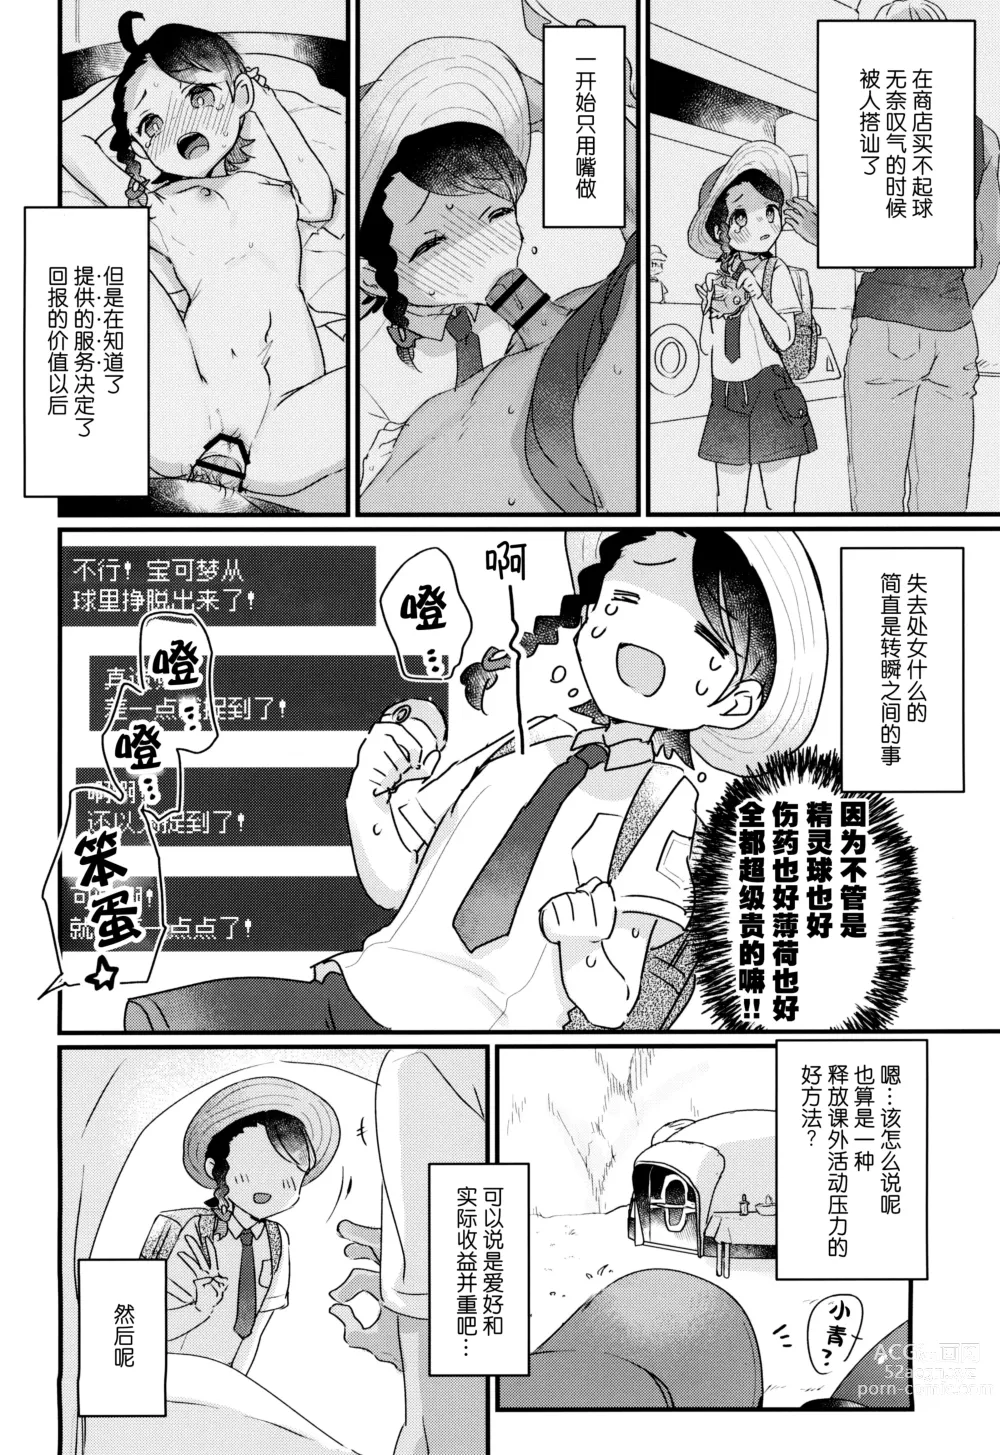 Page 6 of doujinshi 因为零花钱，完全不够用嘛